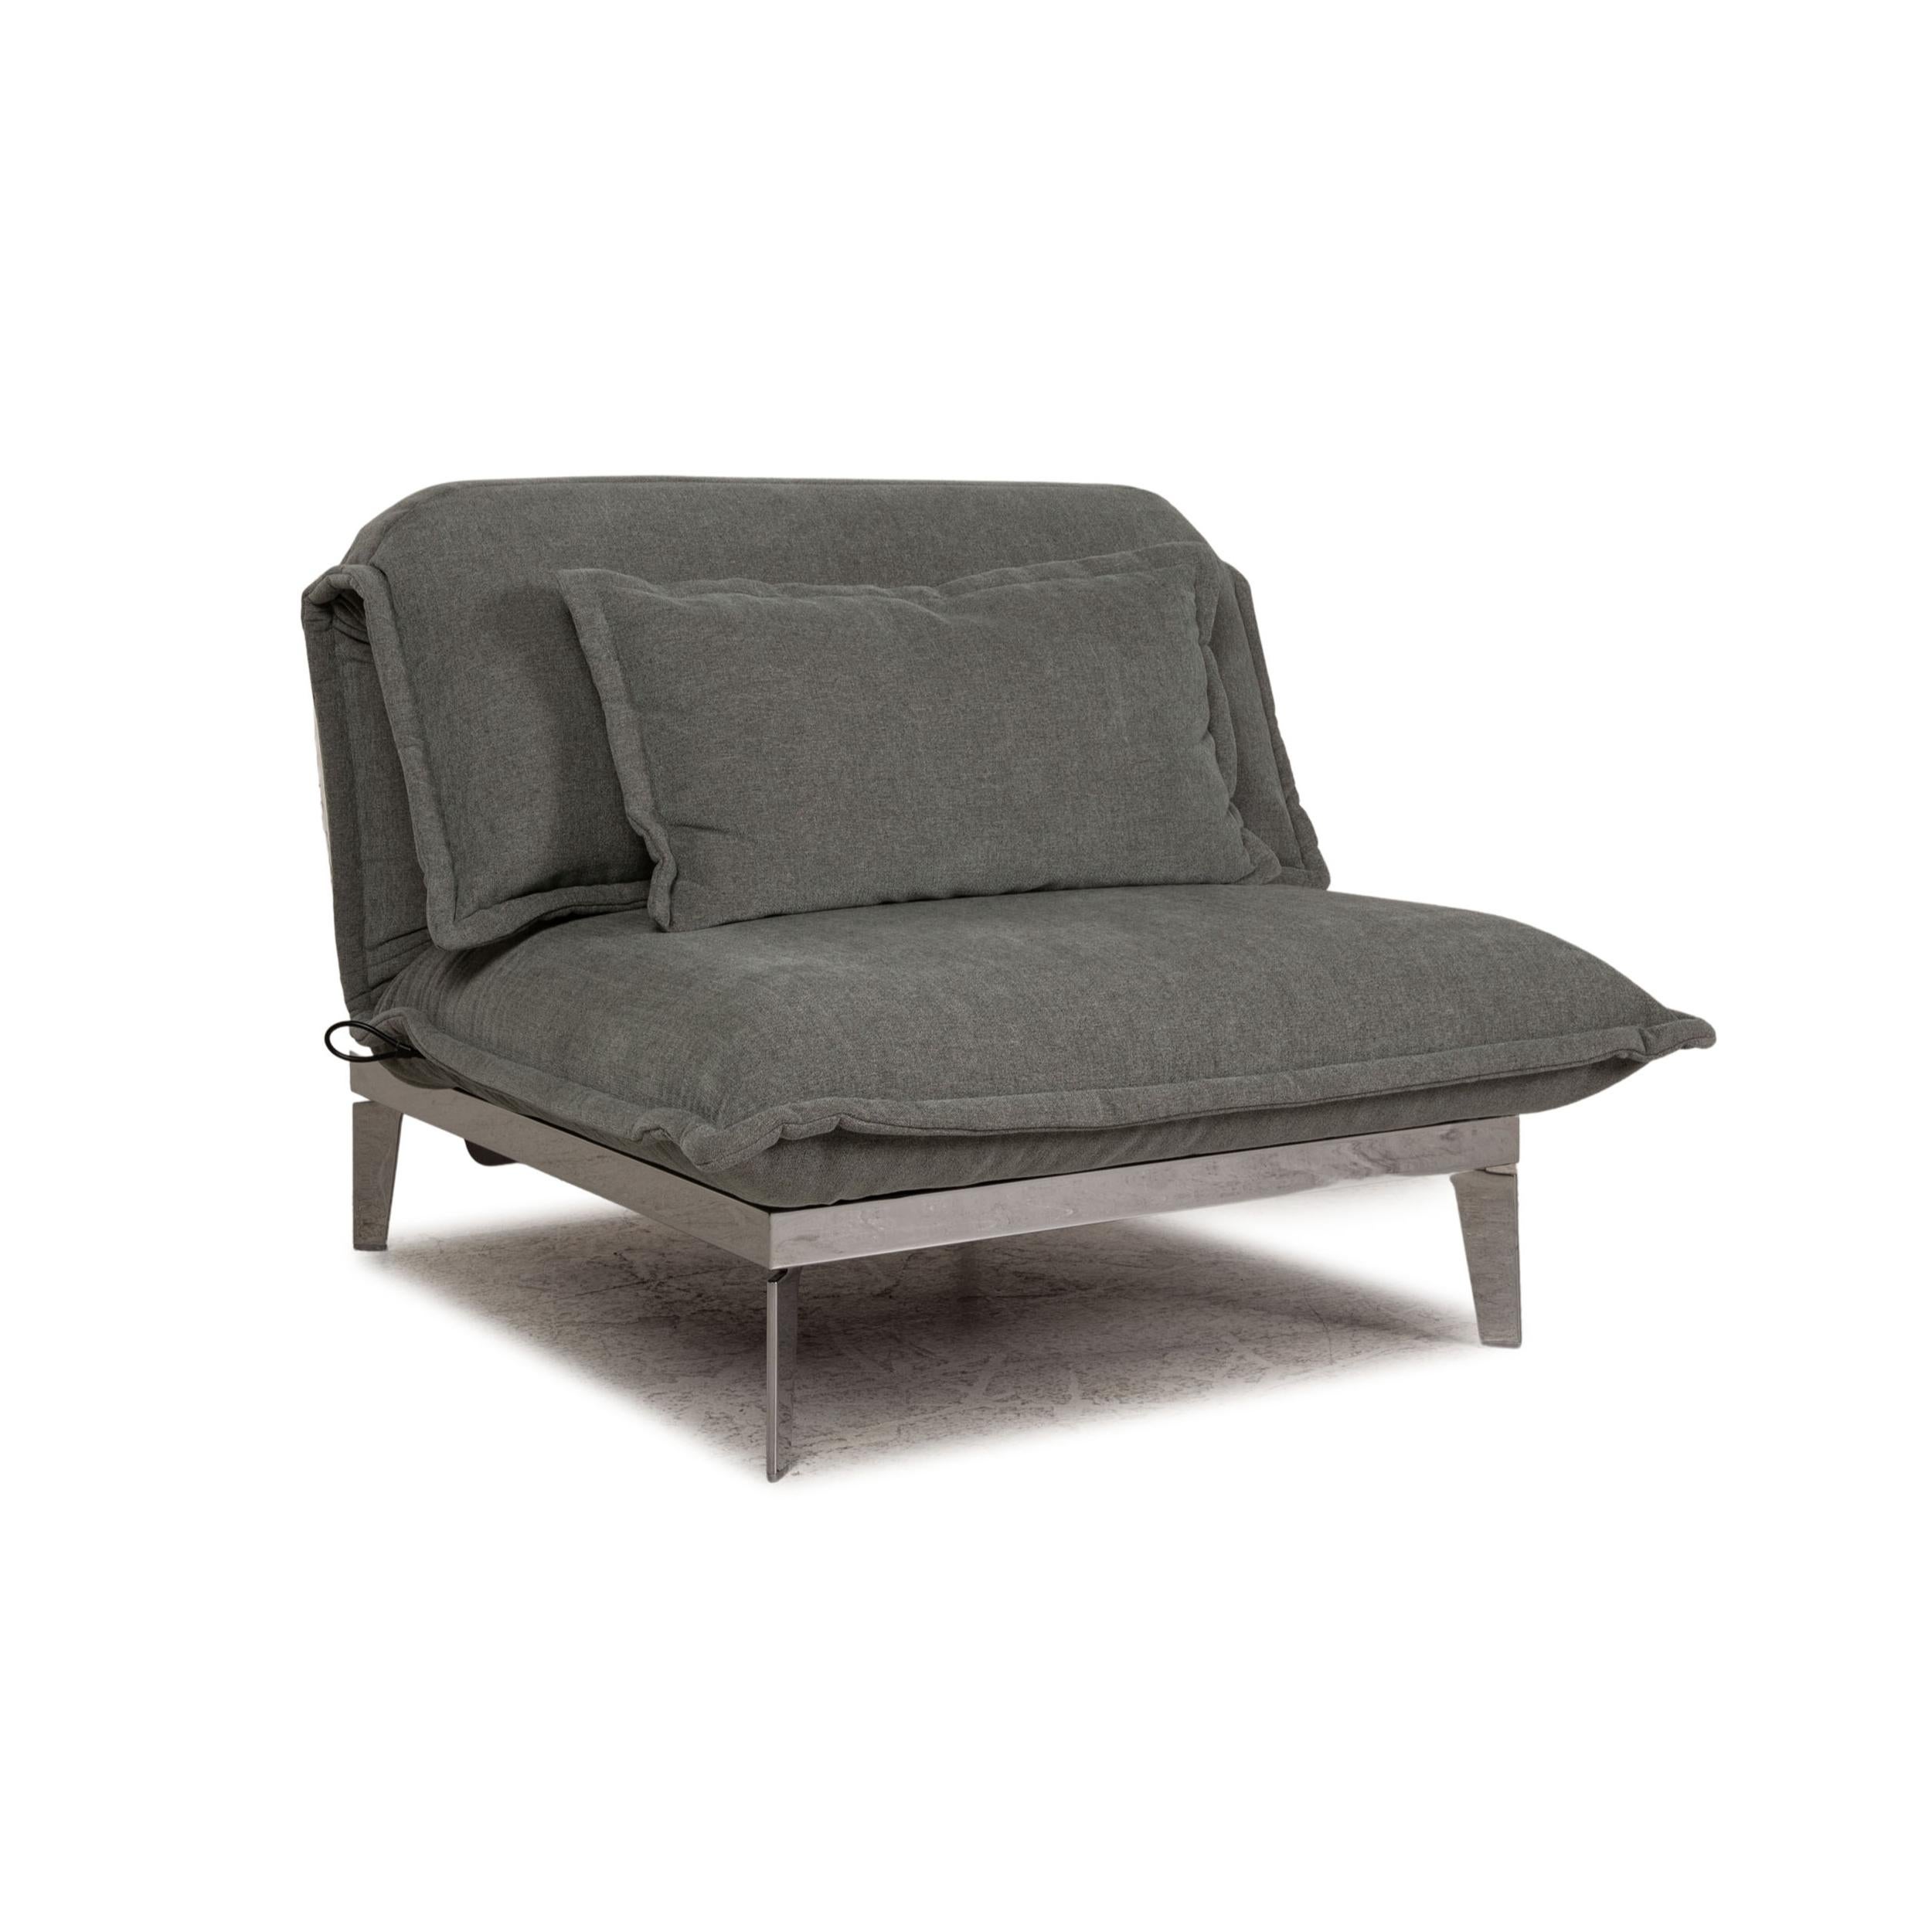 German Rolf Benz Nova 340 Fabric Armchair Gray Function Relax Function For Sale